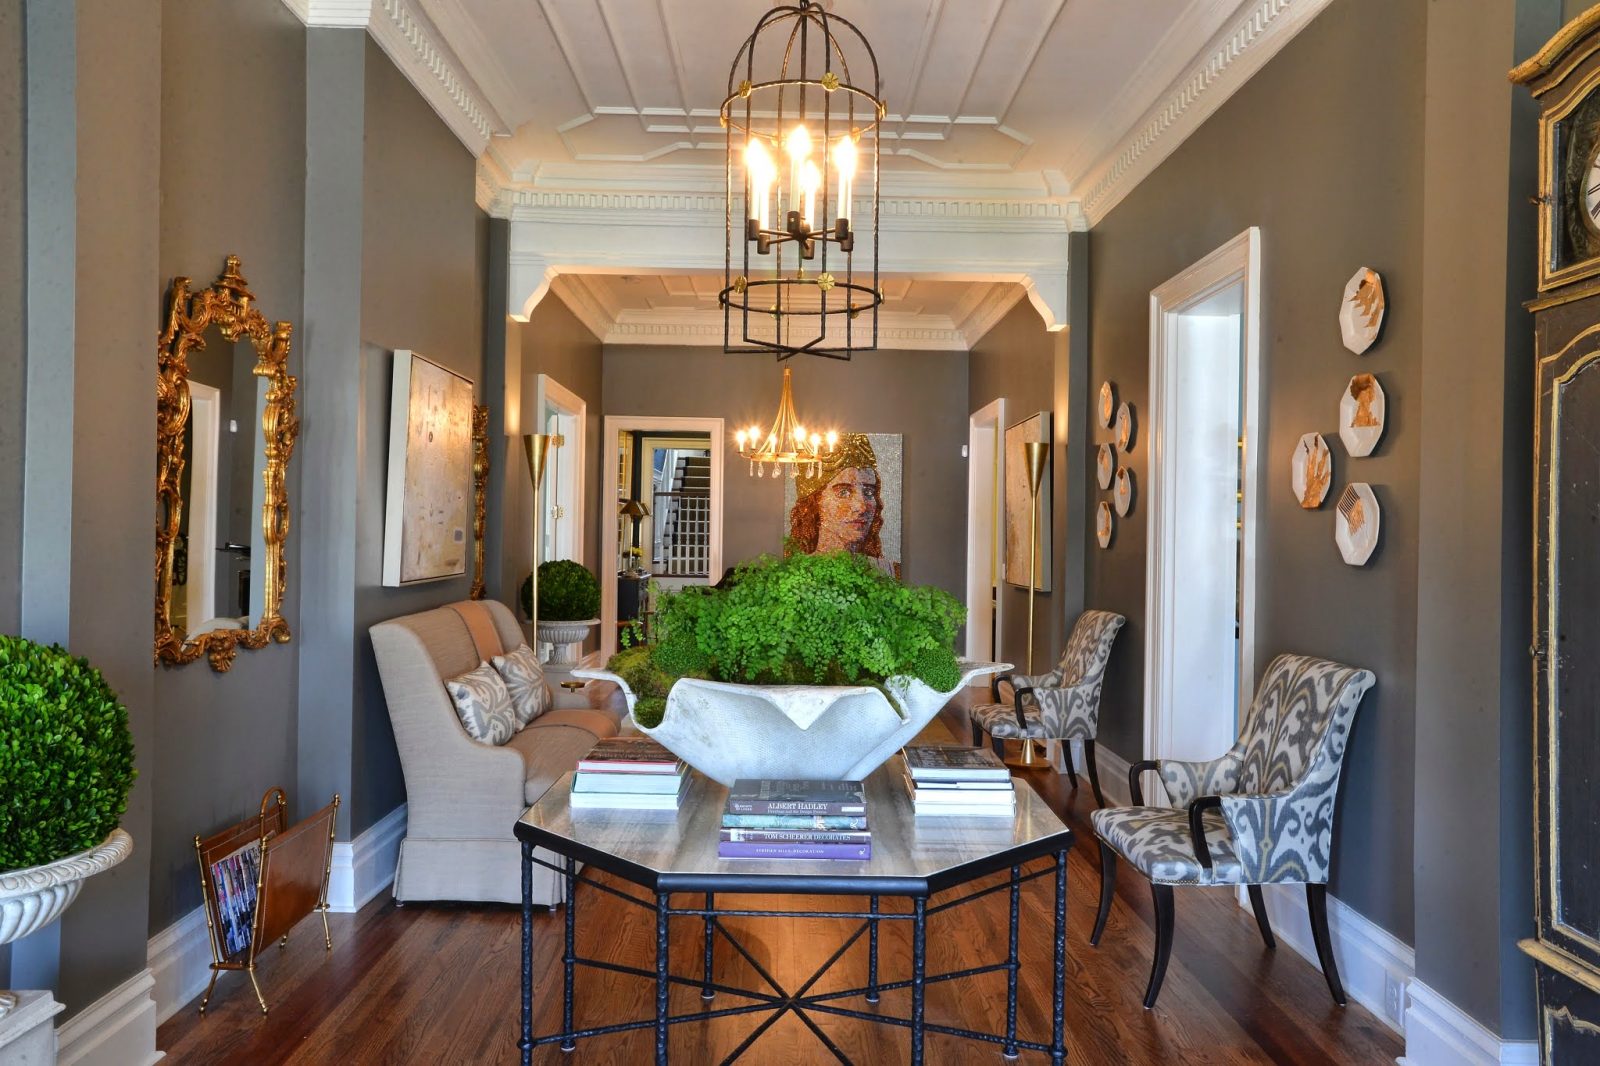 Piper Louise, serving interior designers in the Tennessee area